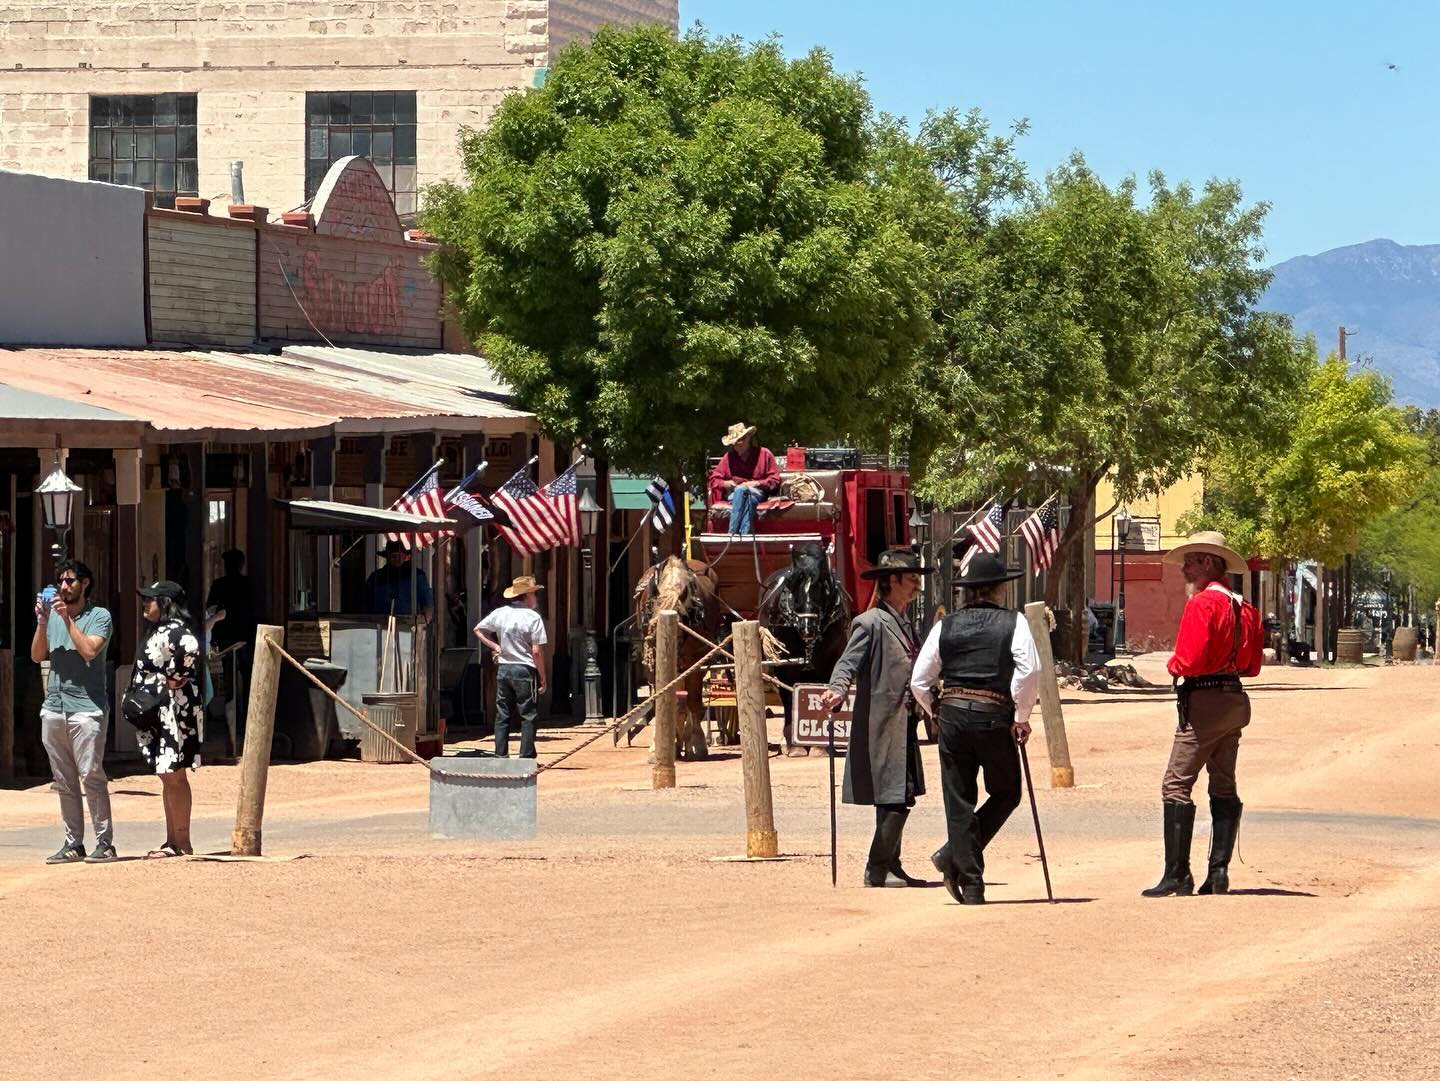 Exterior shot of cowboy performers in the middle of the street in Tombstone, AZ.